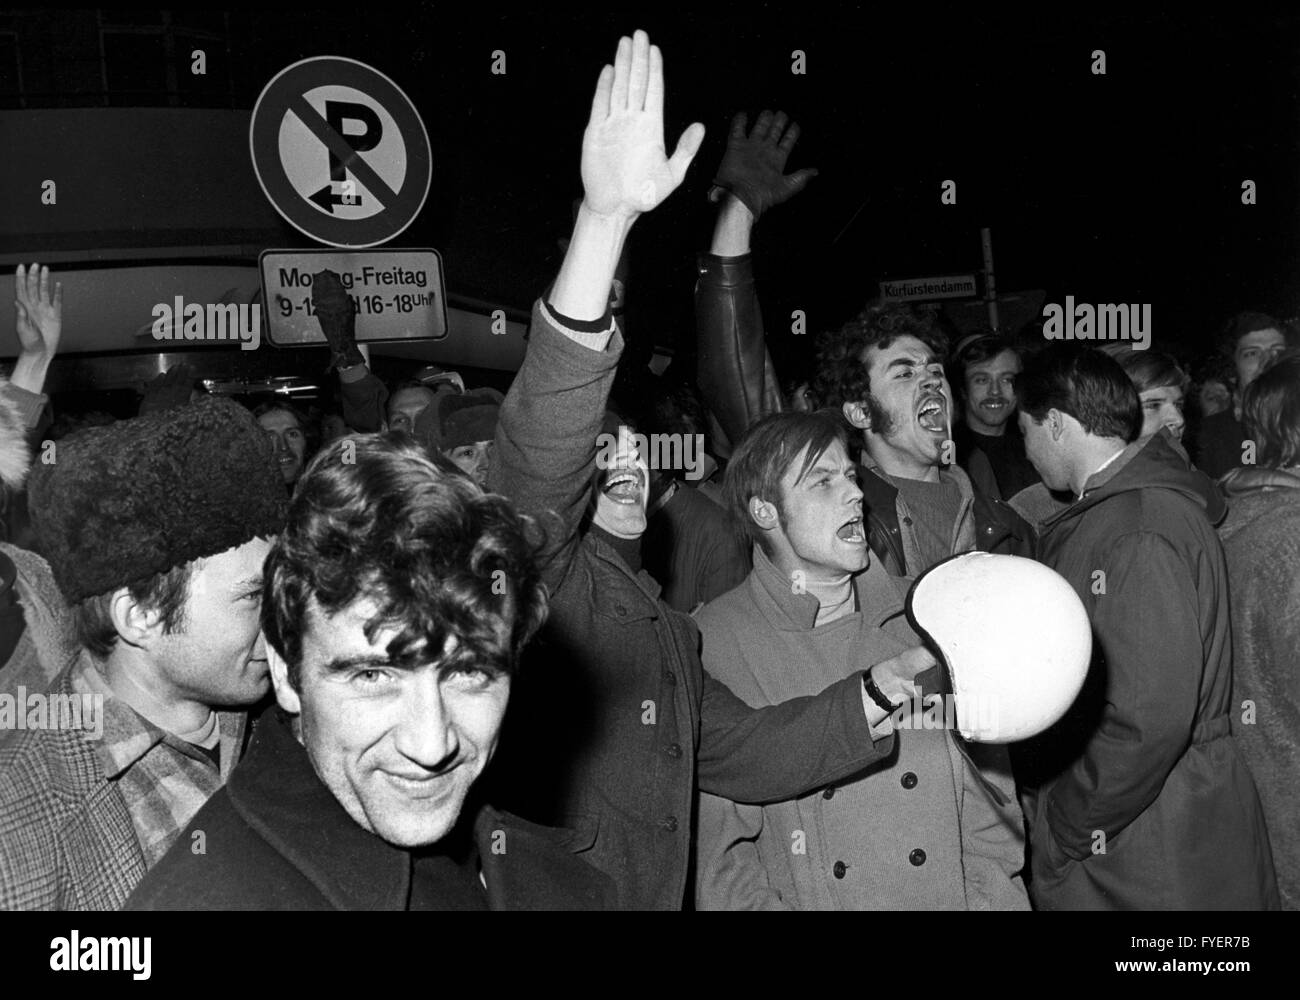 Demonstrators raise their arms and shout 'Sieg heil' and 'Nazis out of West Berlin' during a demonstration against the NPD (National Democratic Party of Germany) on 04 March 1969 in Berlin. Stock Photo